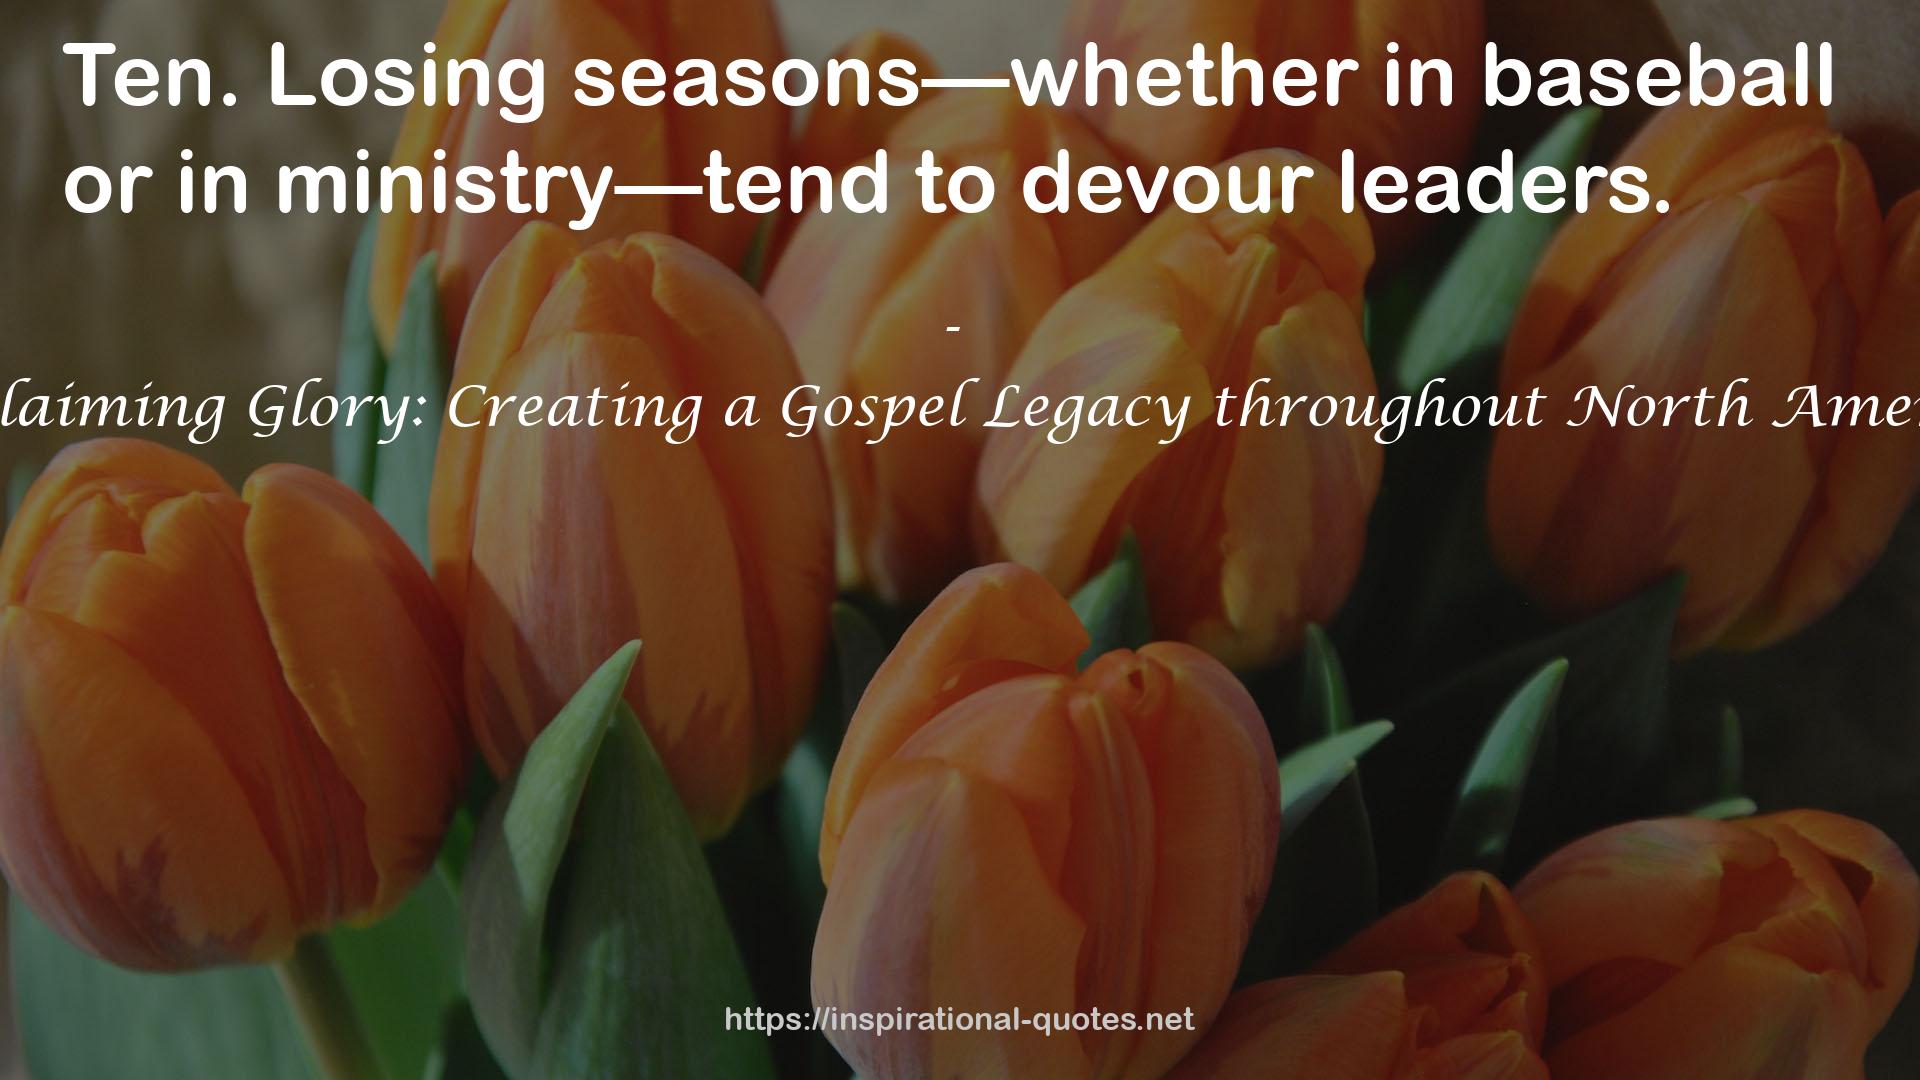 Reclaiming Glory: Creating a Gospel Legacy throughout North America QUOTES